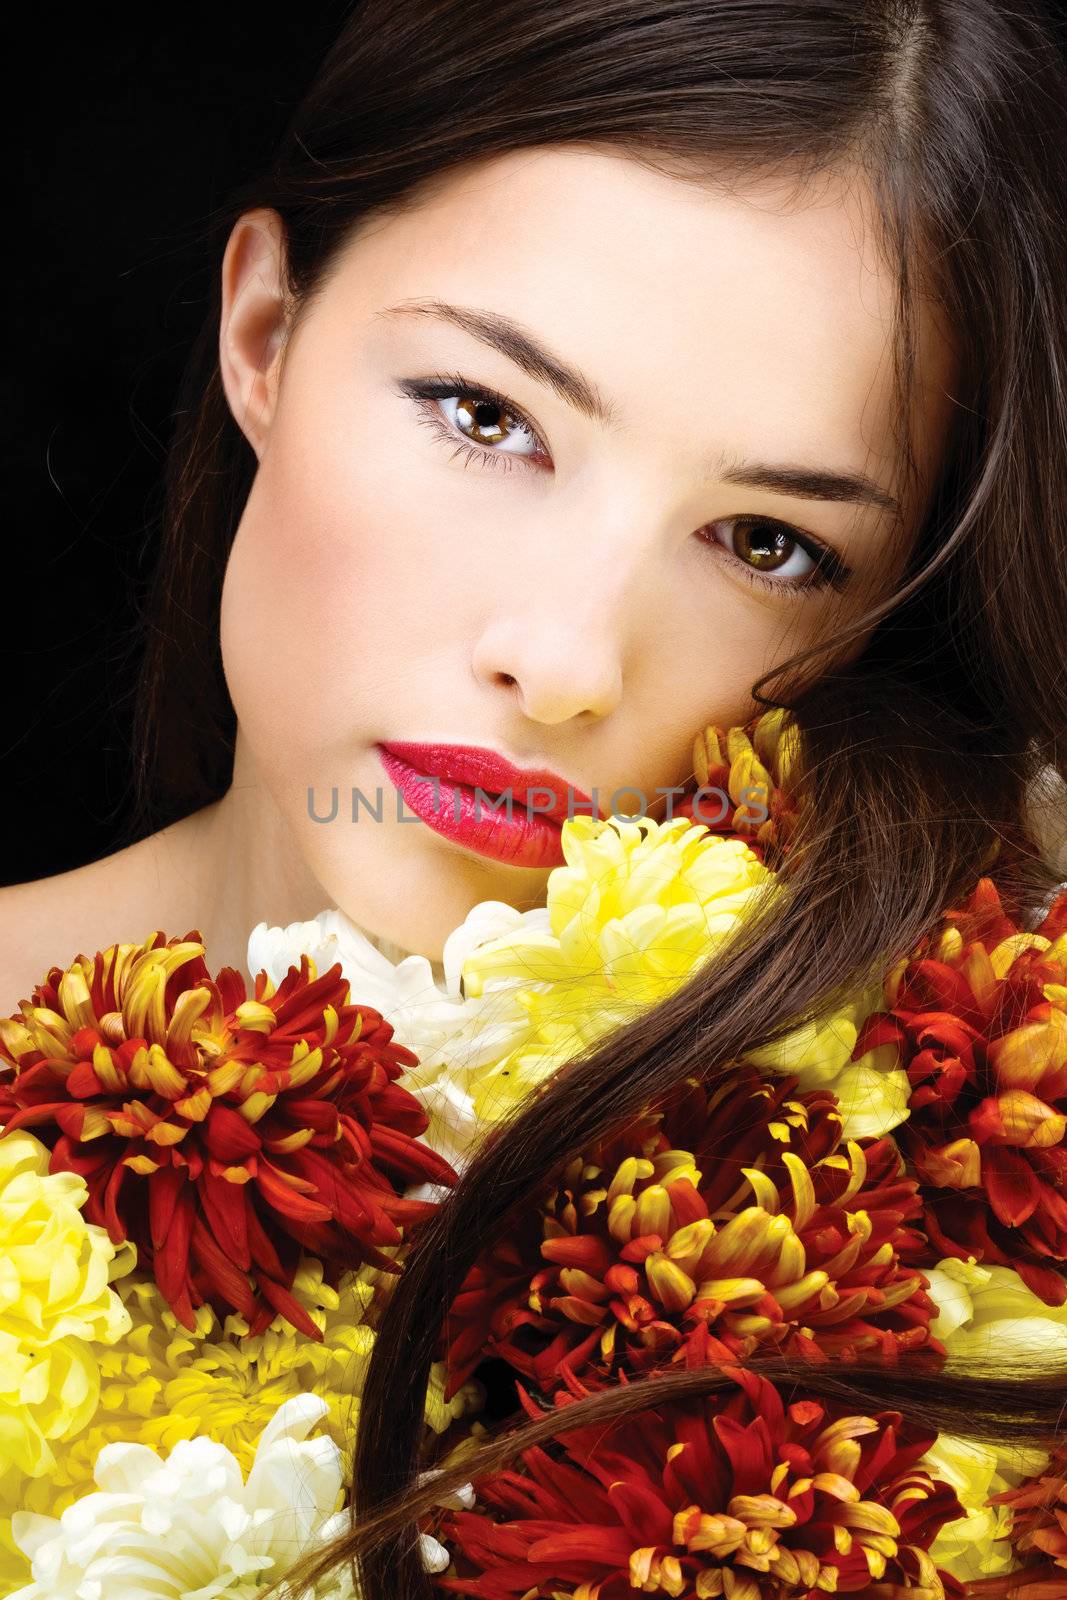 Pretty black hair woman with flowers